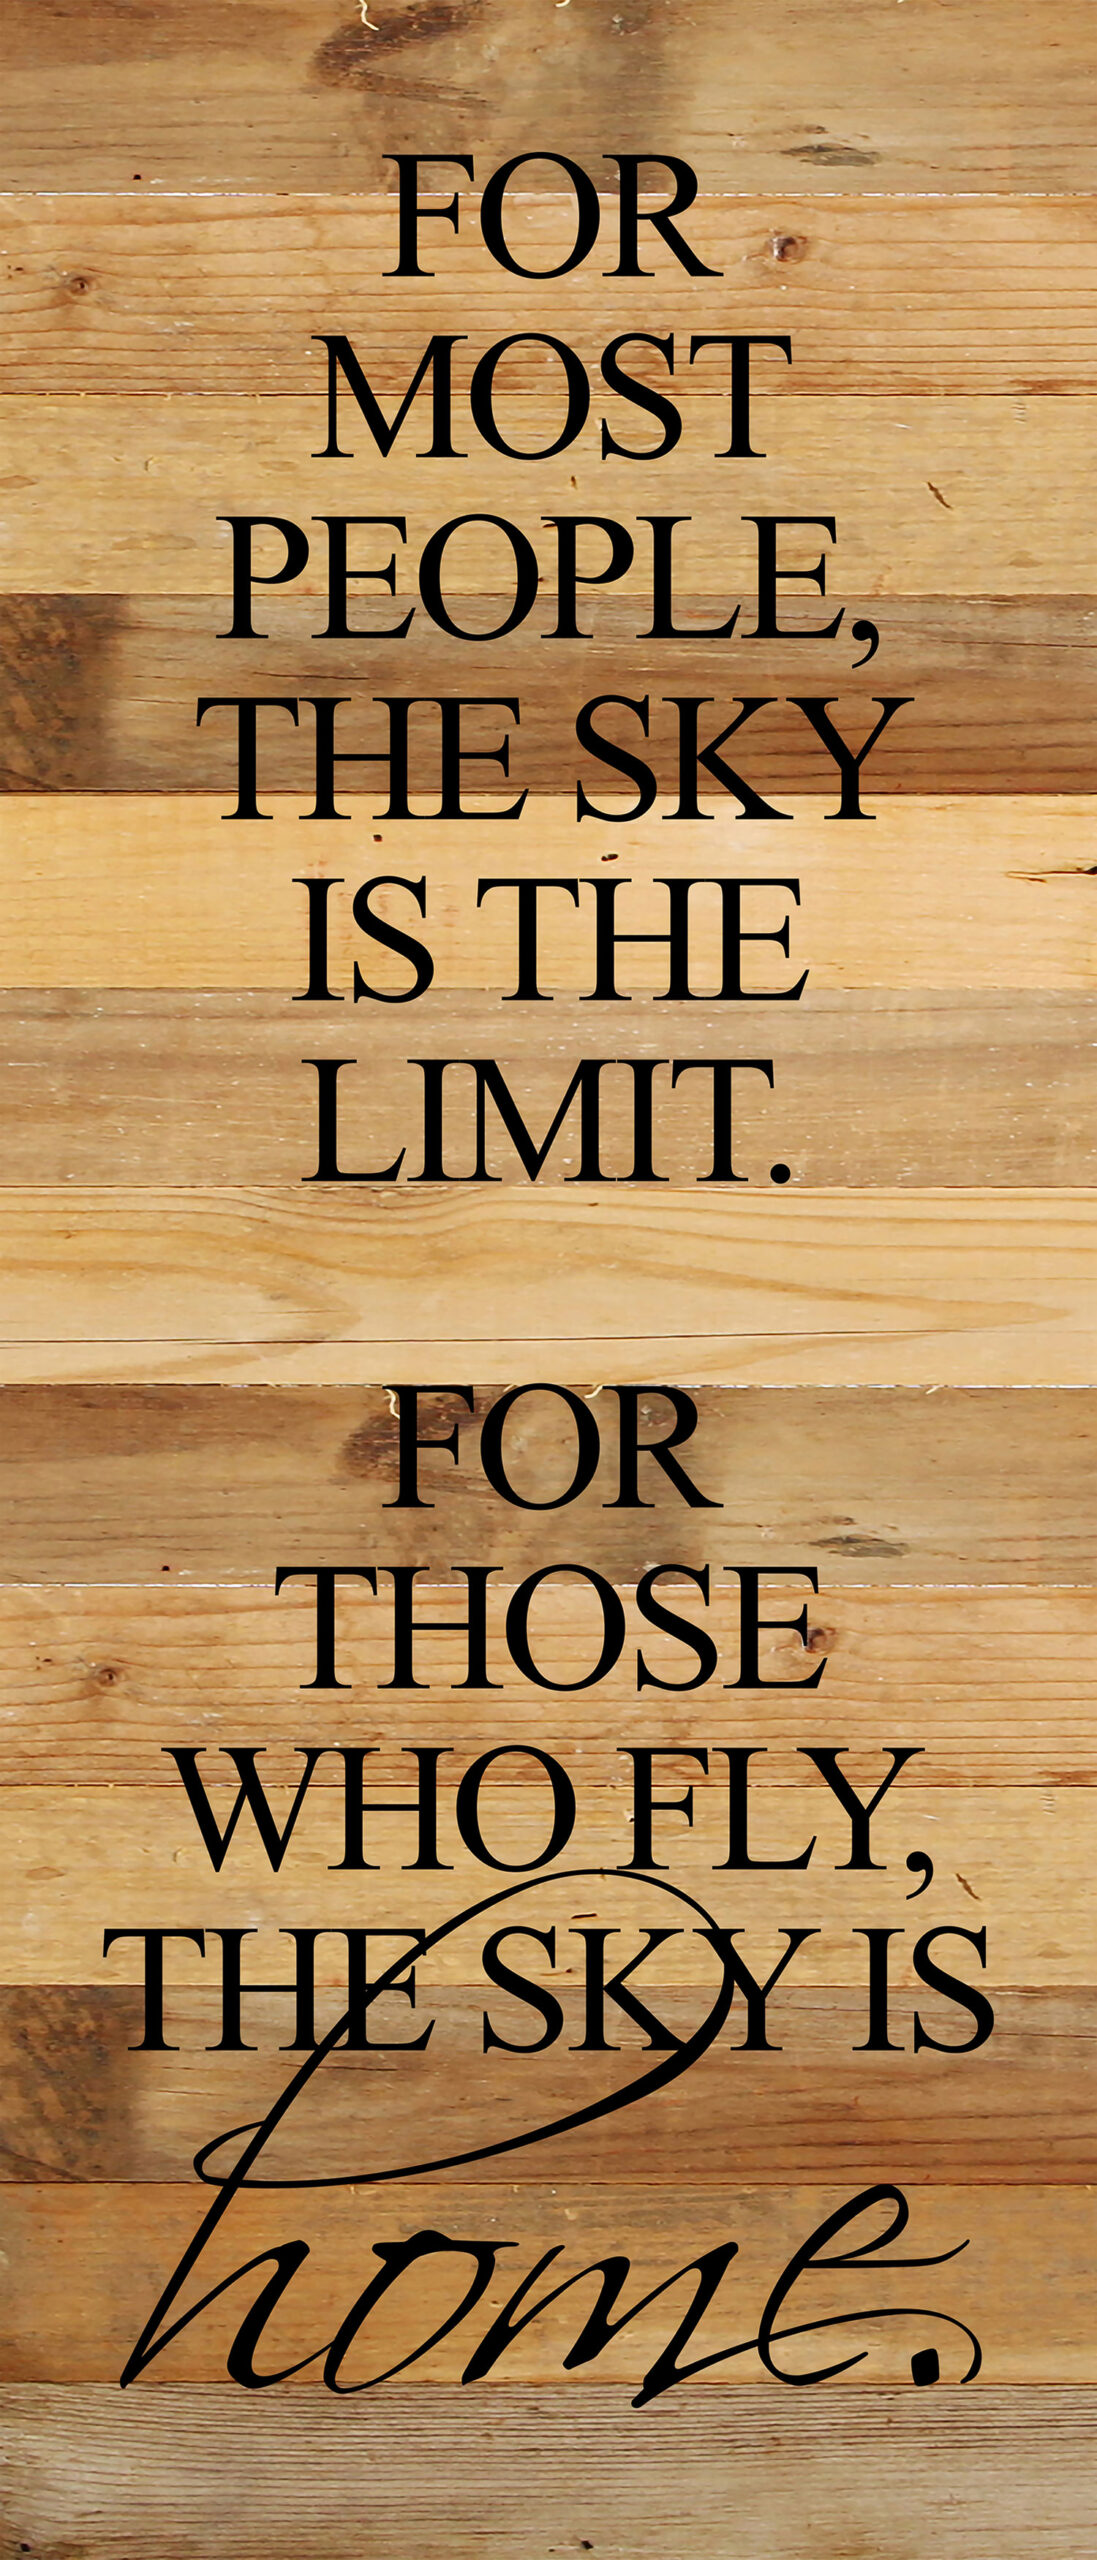 For most people, the sky is the limit. For those who fly, the sky is home. / 6"x14" Reclaimed Wood Sign